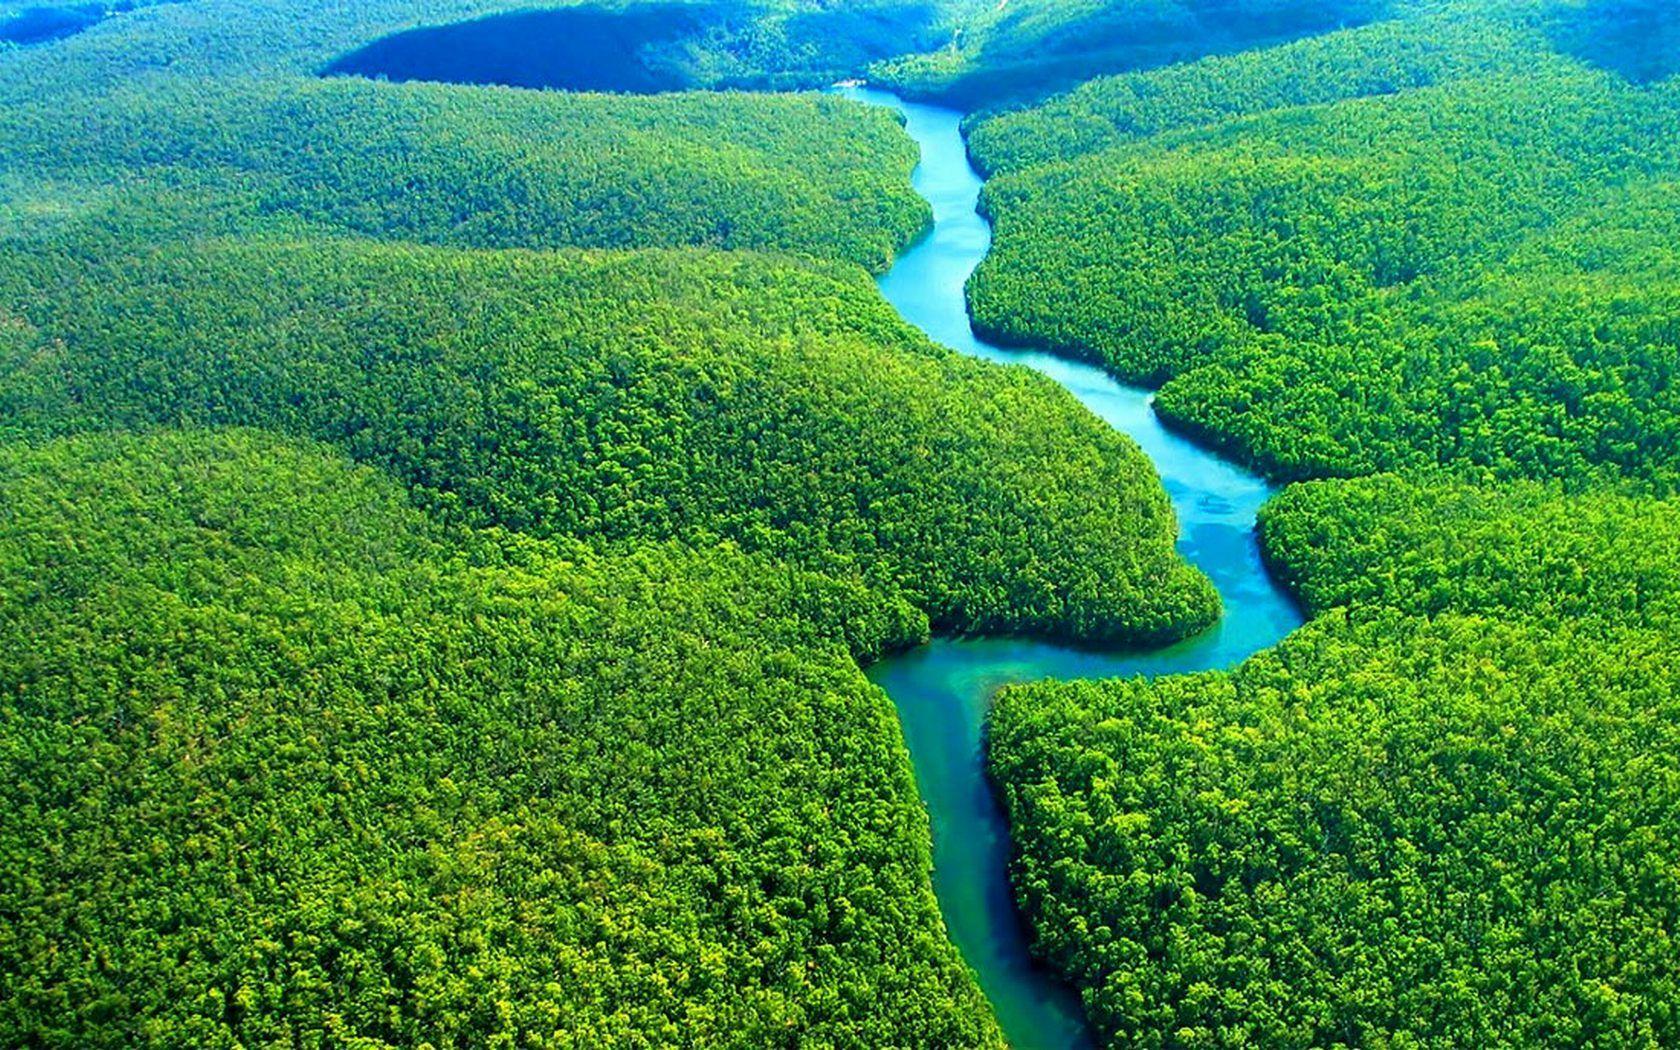 Amazon Rainforest Wallpaper for desktop and mobile in high